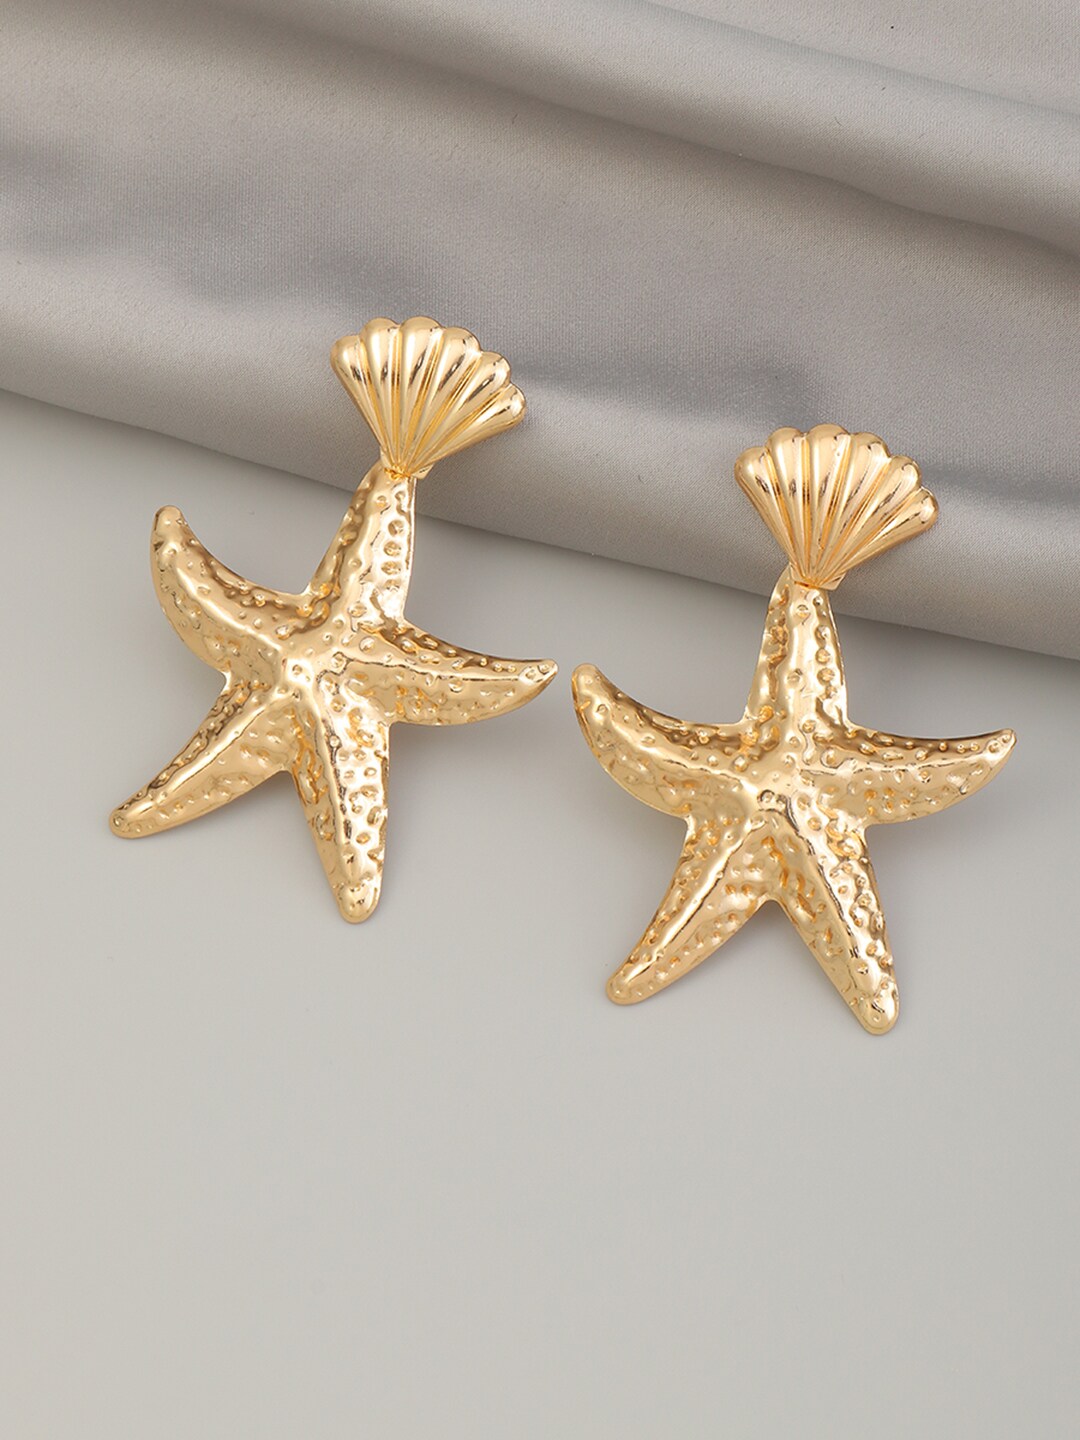 URBANIC Gold-Toned Starfish-Shaped Hammered Effect Drop Earrings Price in India